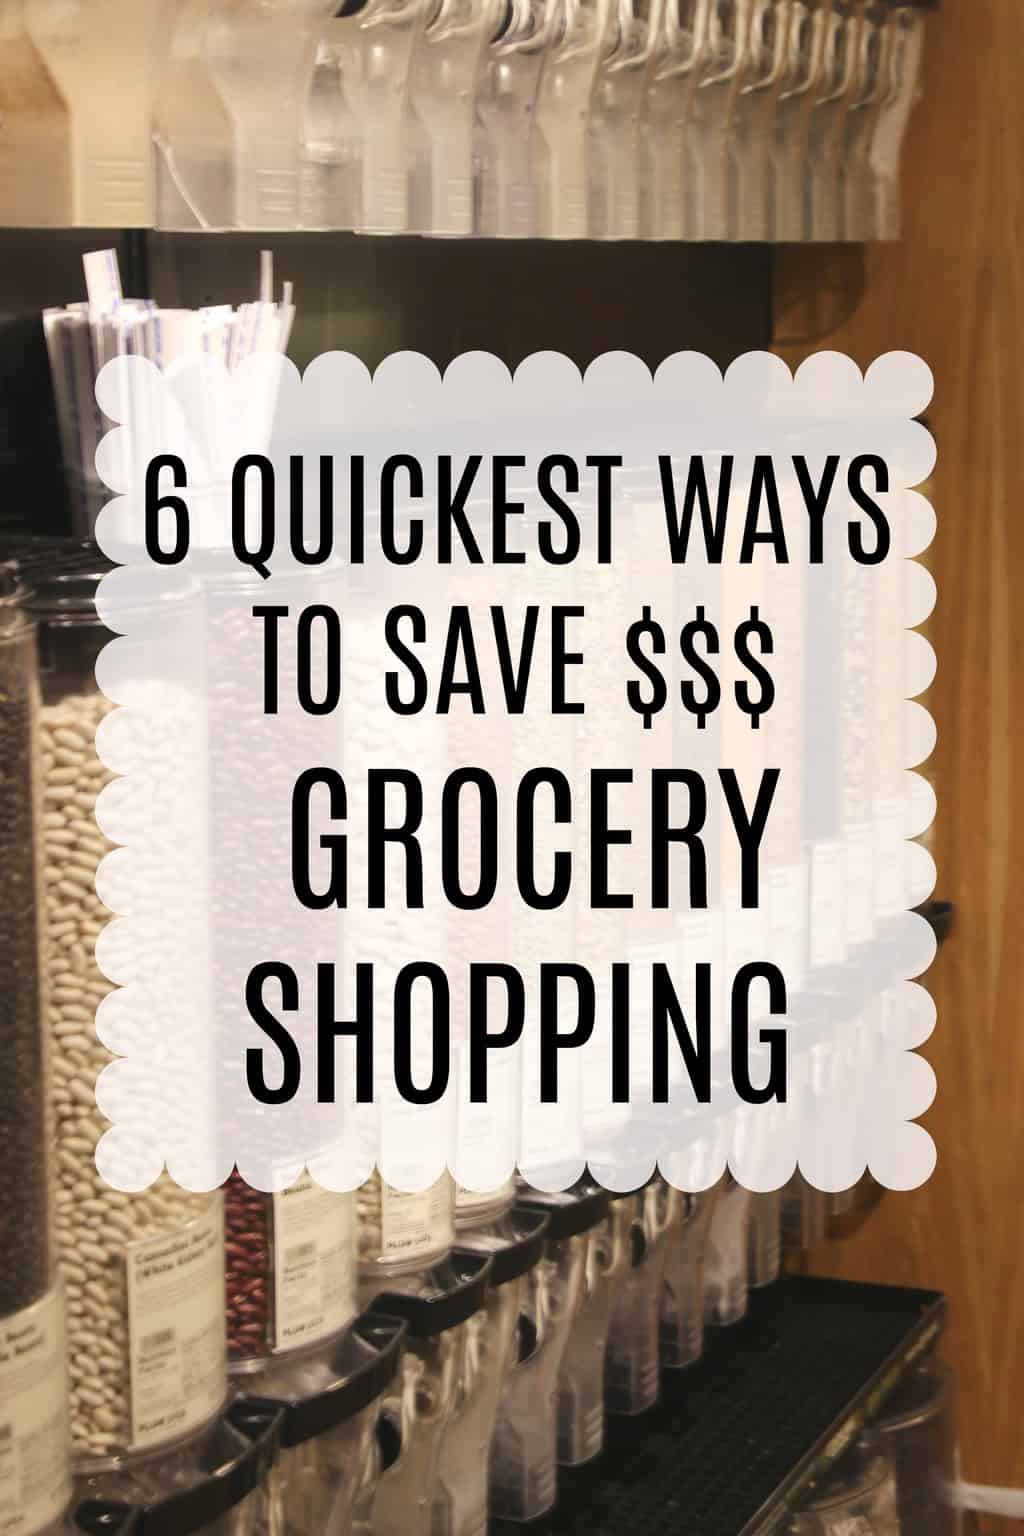 Easy ways to save money grocery shopping that don't take much time!